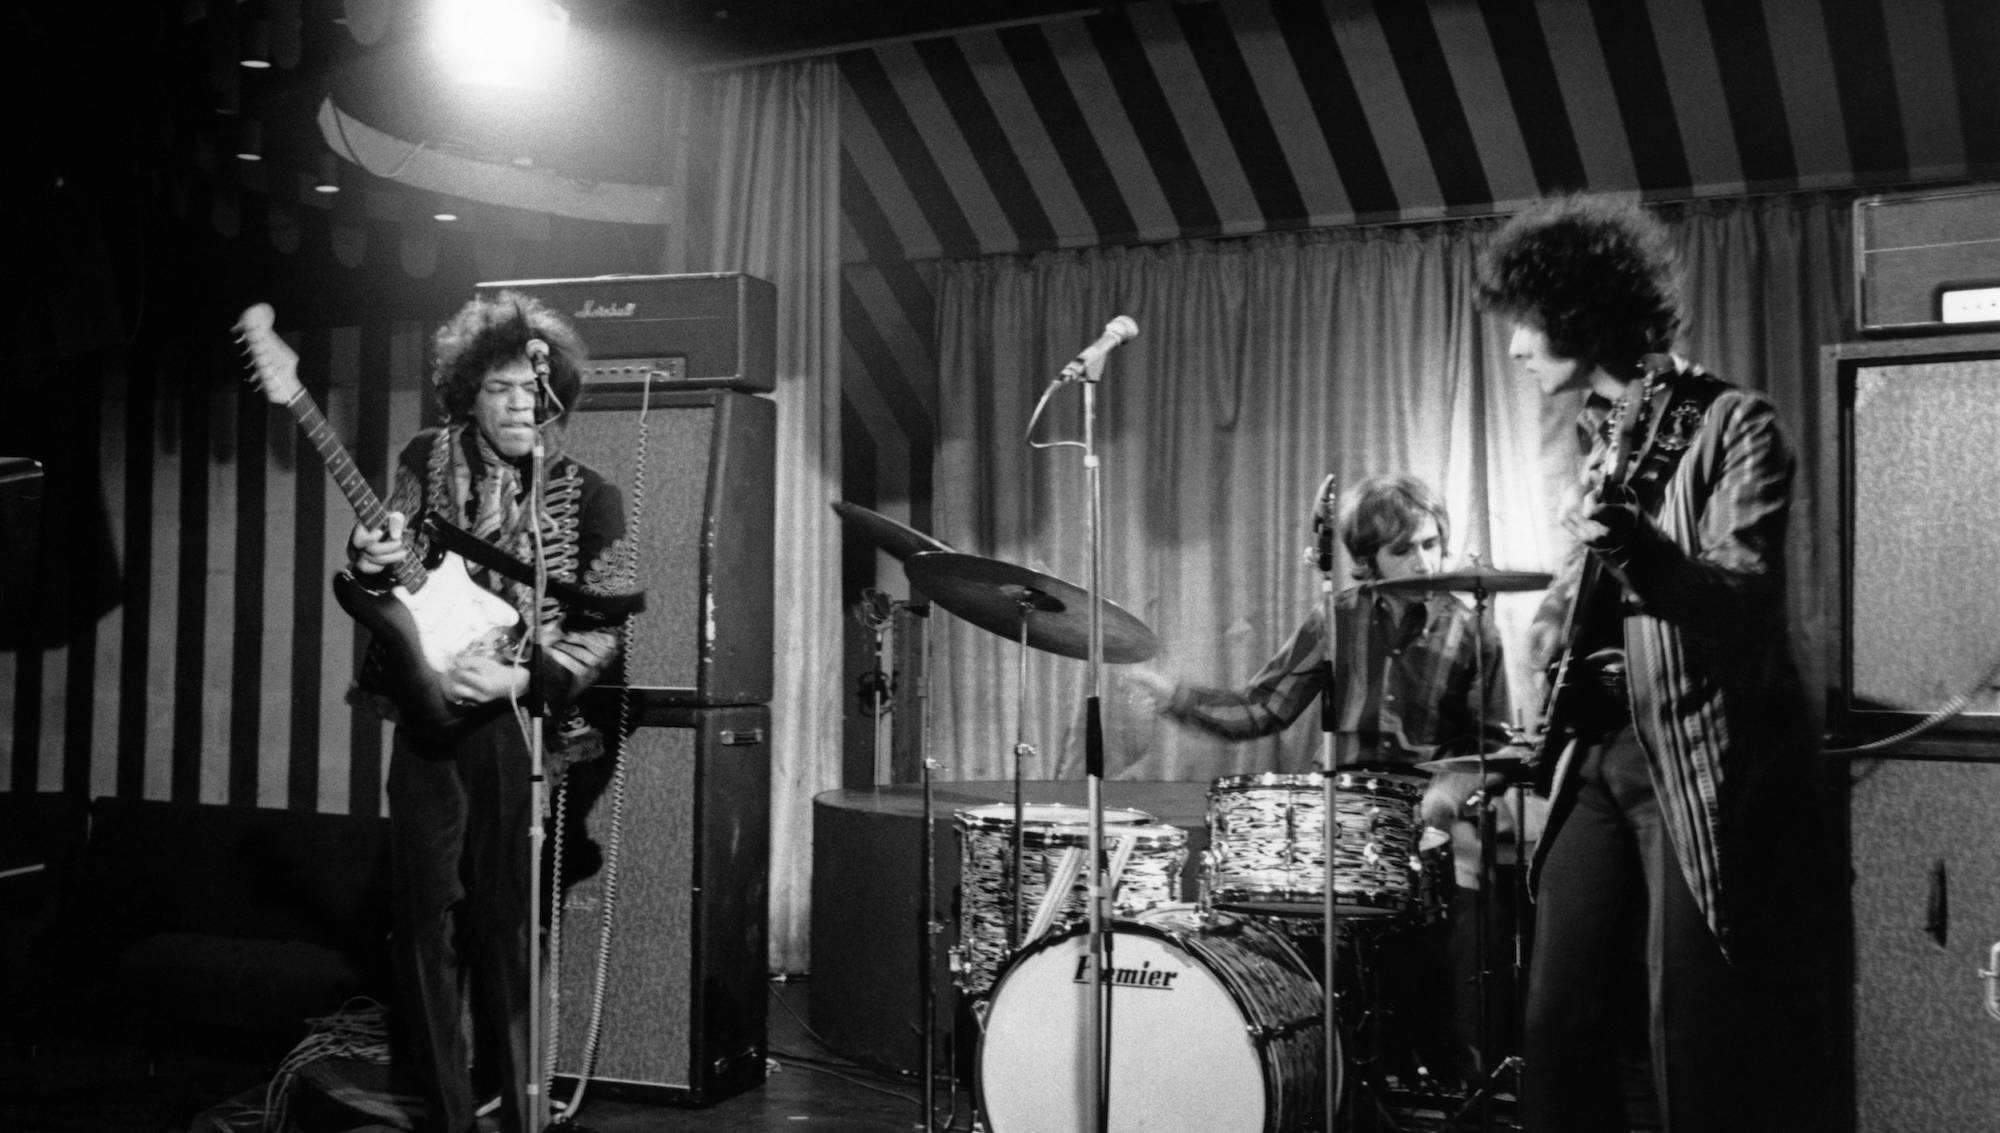 Grusom bjerg let at håndtere The Estates of Jimi Hendrix and Noel Redding and Mitch Mitchell are Suing  Each Other – Here's What's Going On | GuitarPlayer